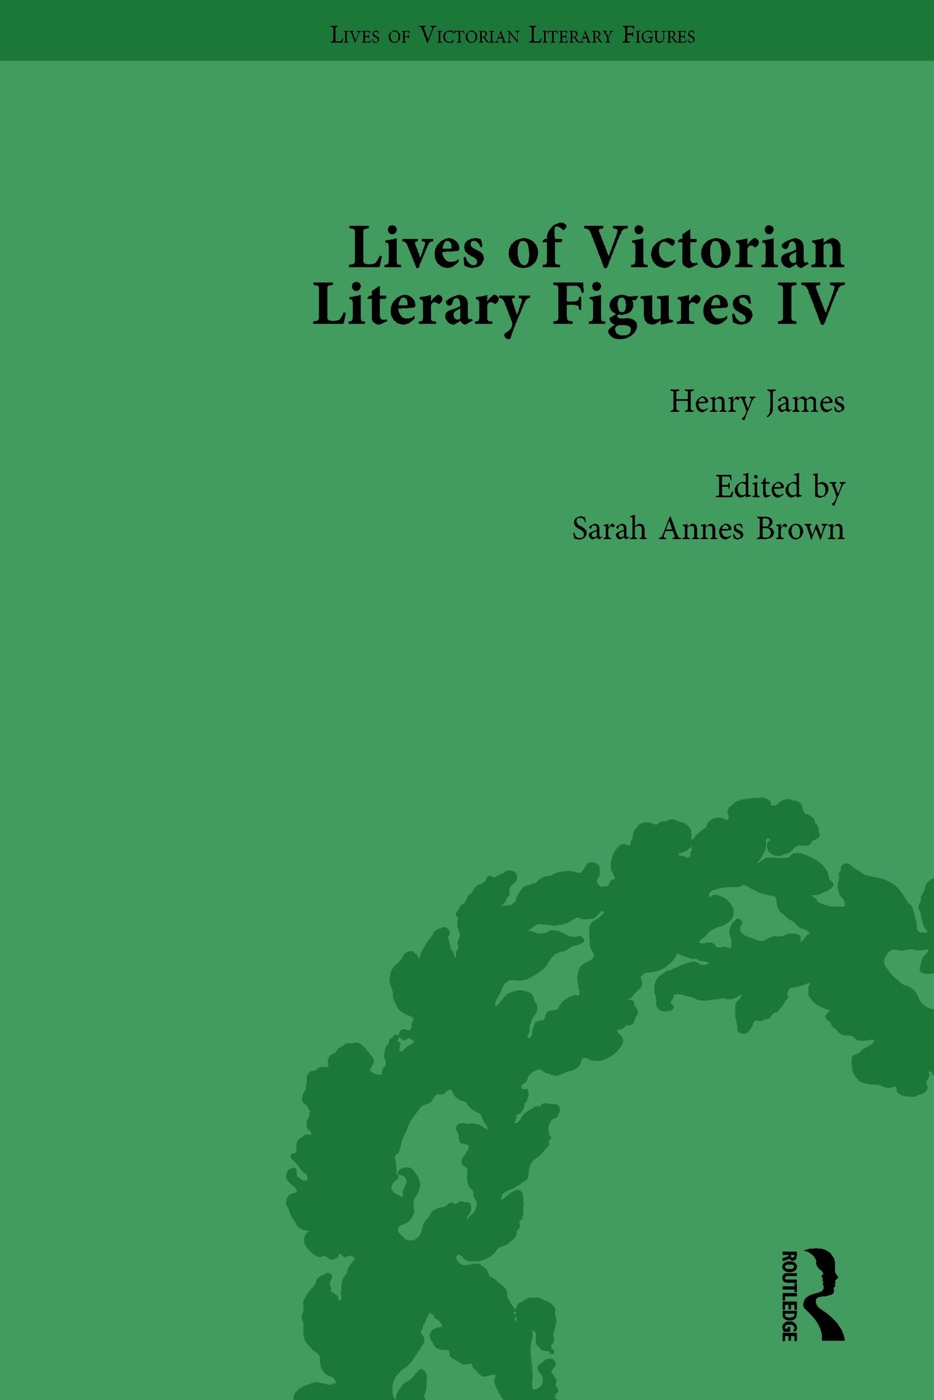 Lives of Victorian Literary Figures, Part IV, Volume 2: Henry James, Edith Wharton and Oscar Wilde by Their Contemporaries